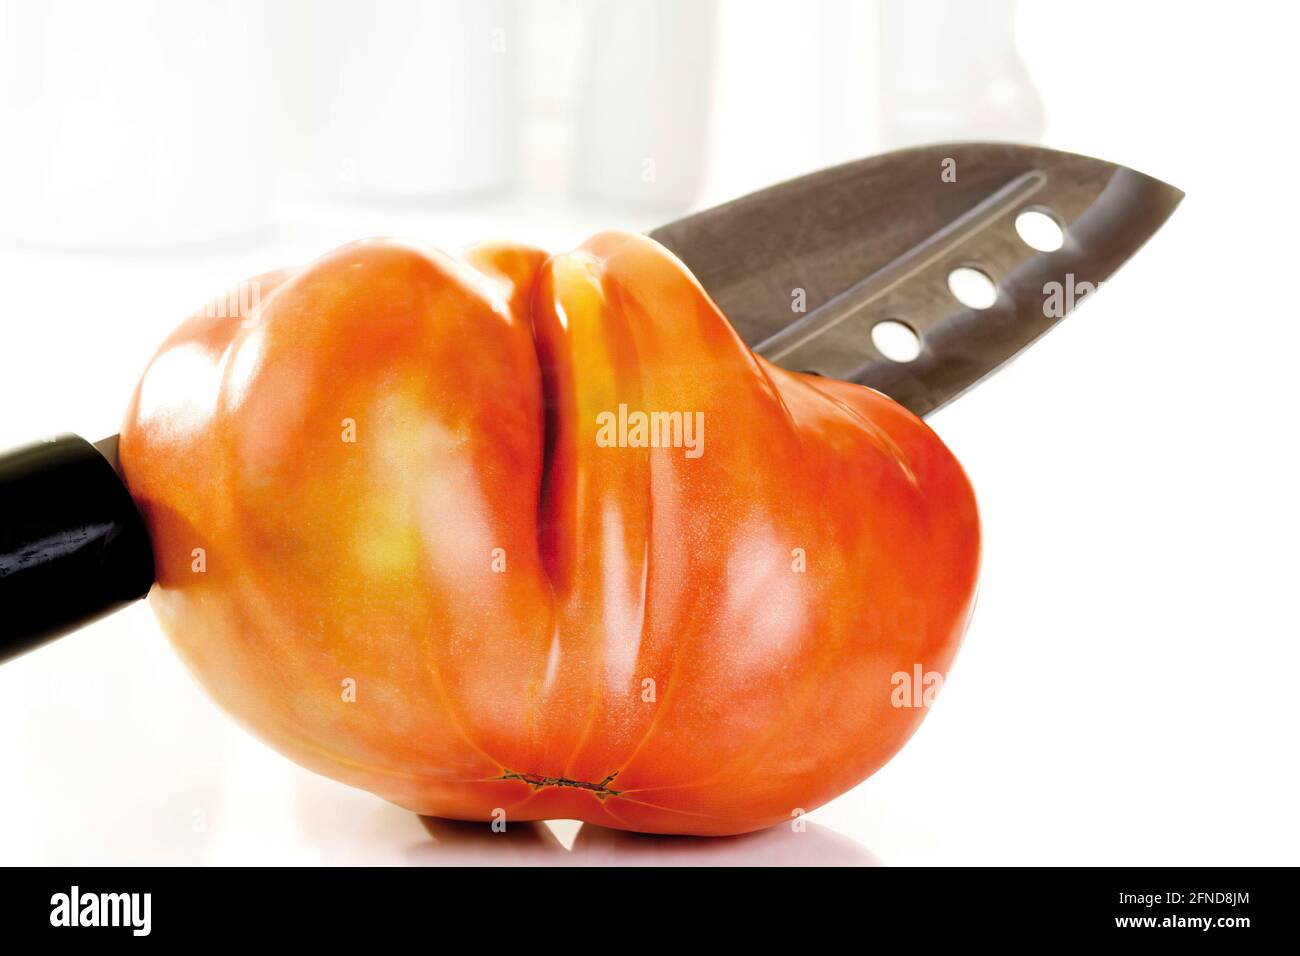 Close up of Oxheart Tomato and knife on white background Stock Photo